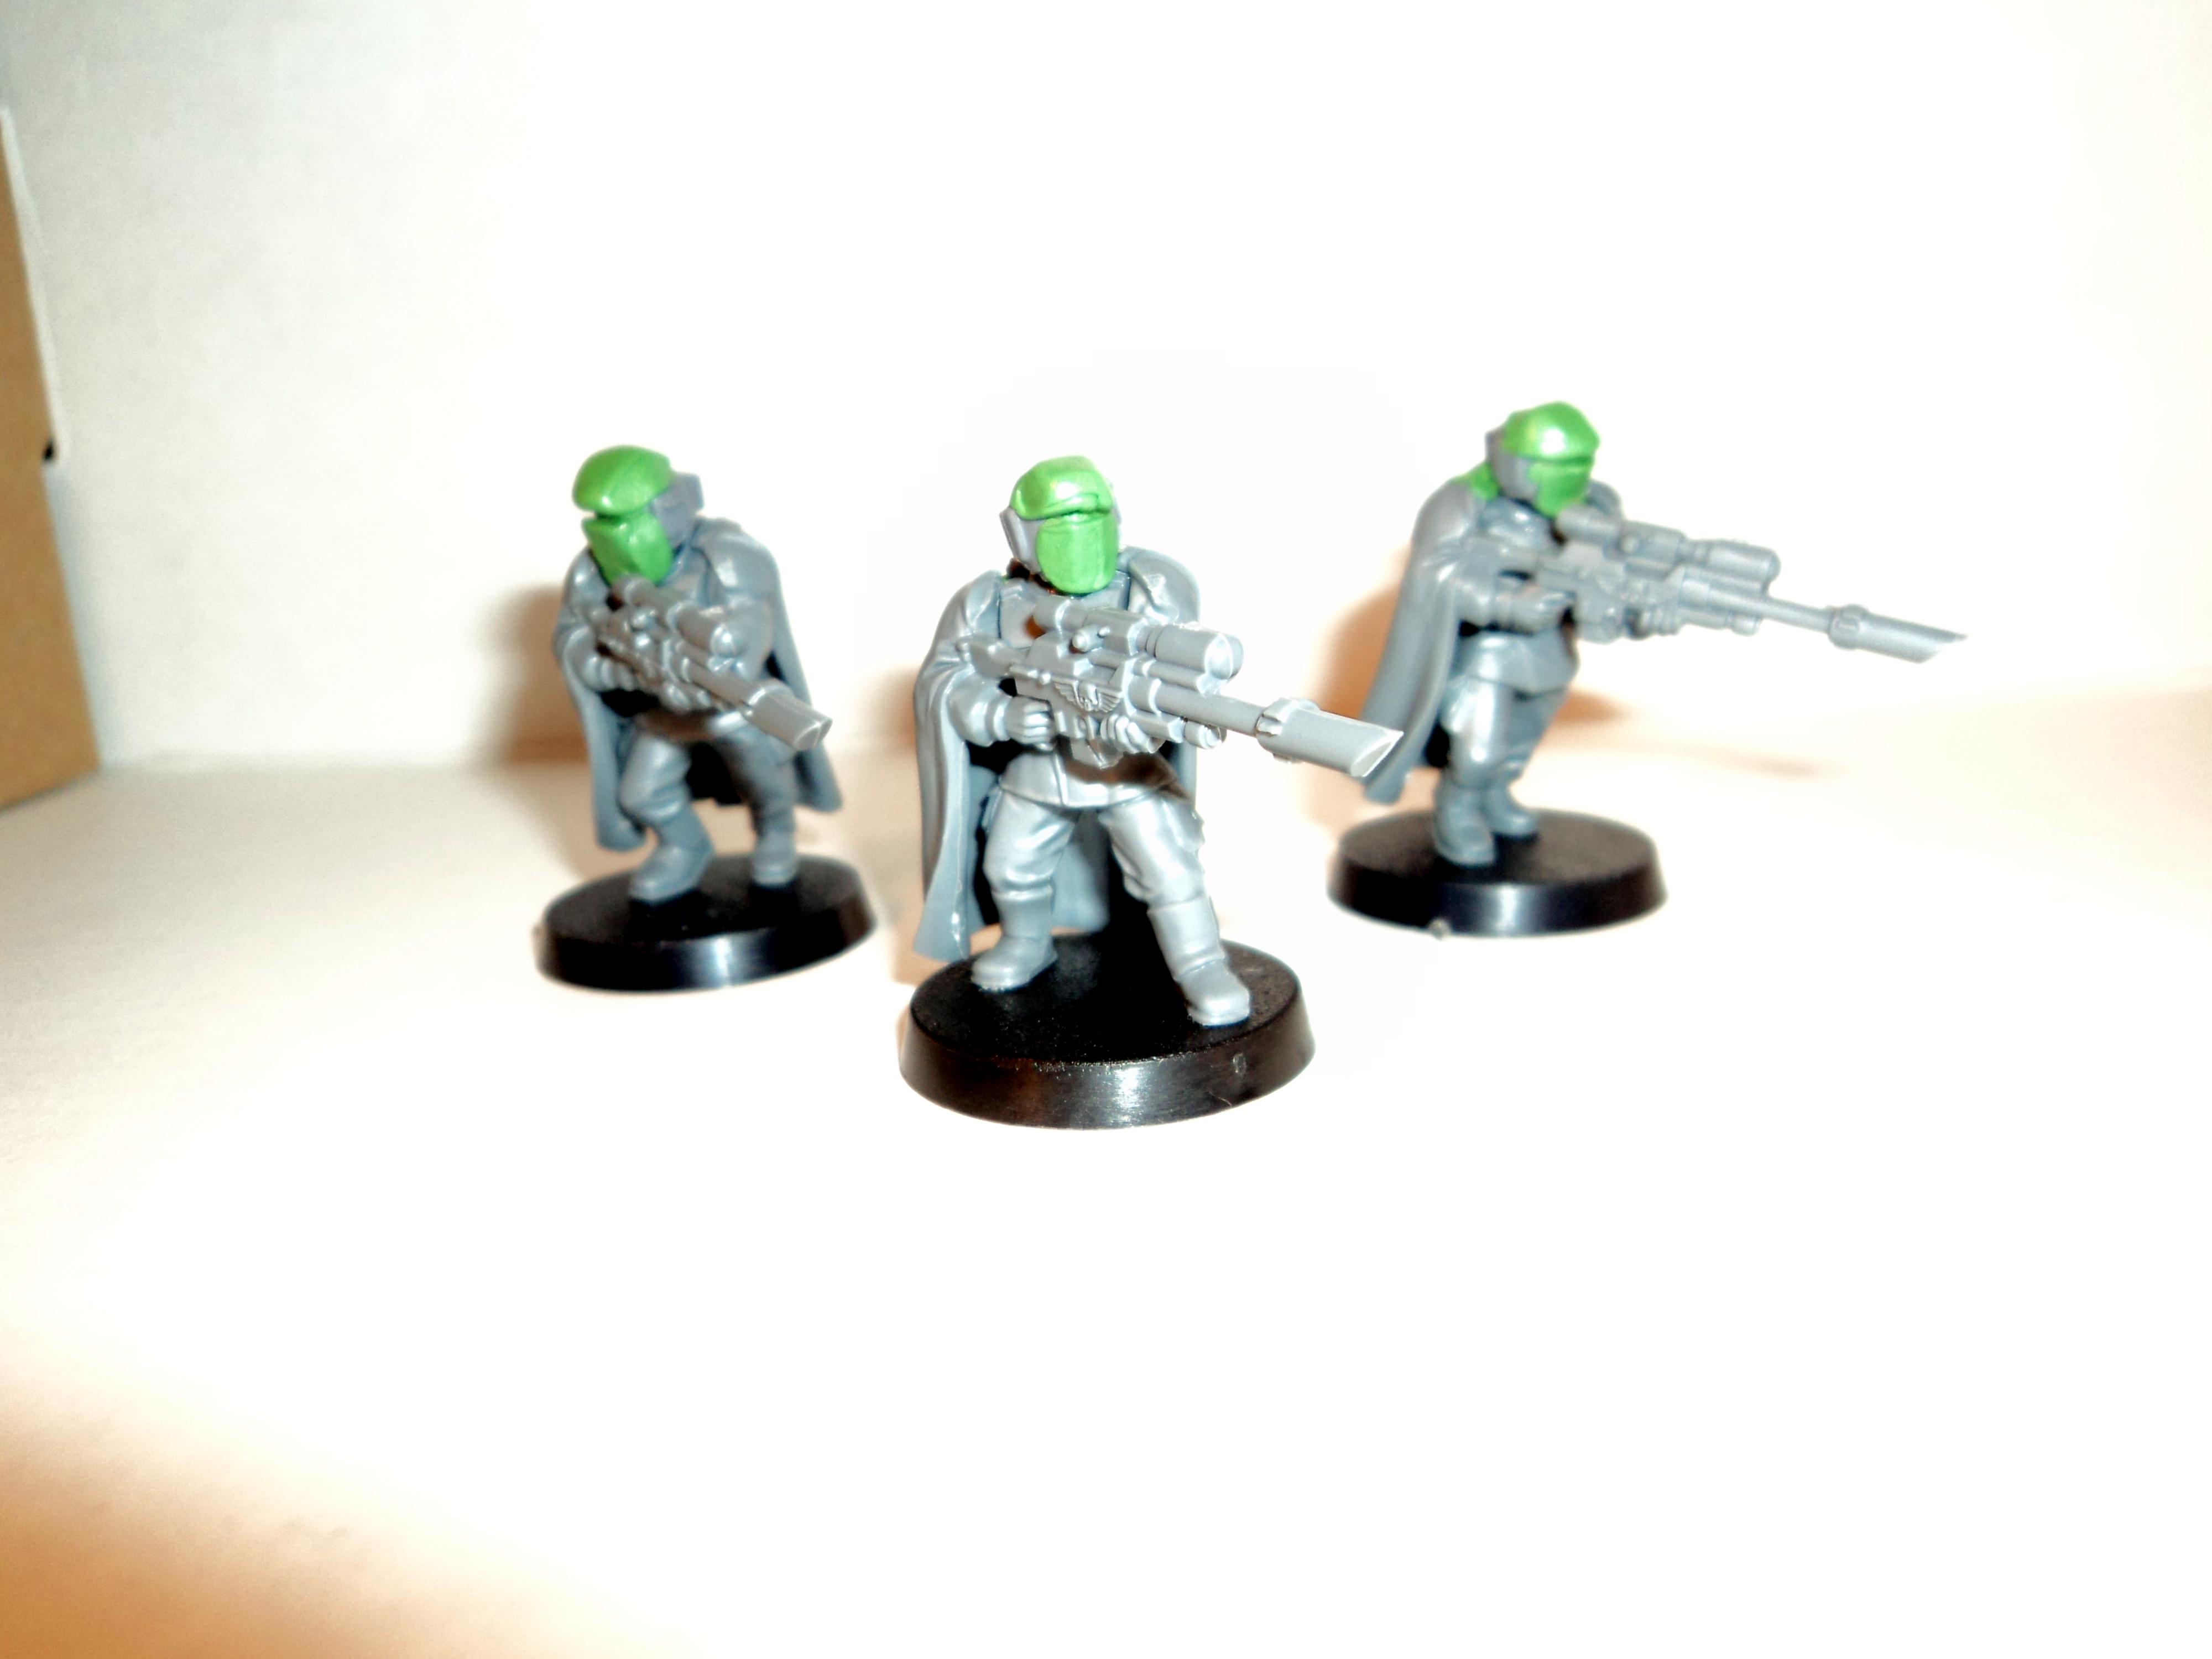 Imperial Guard, ratling snipers